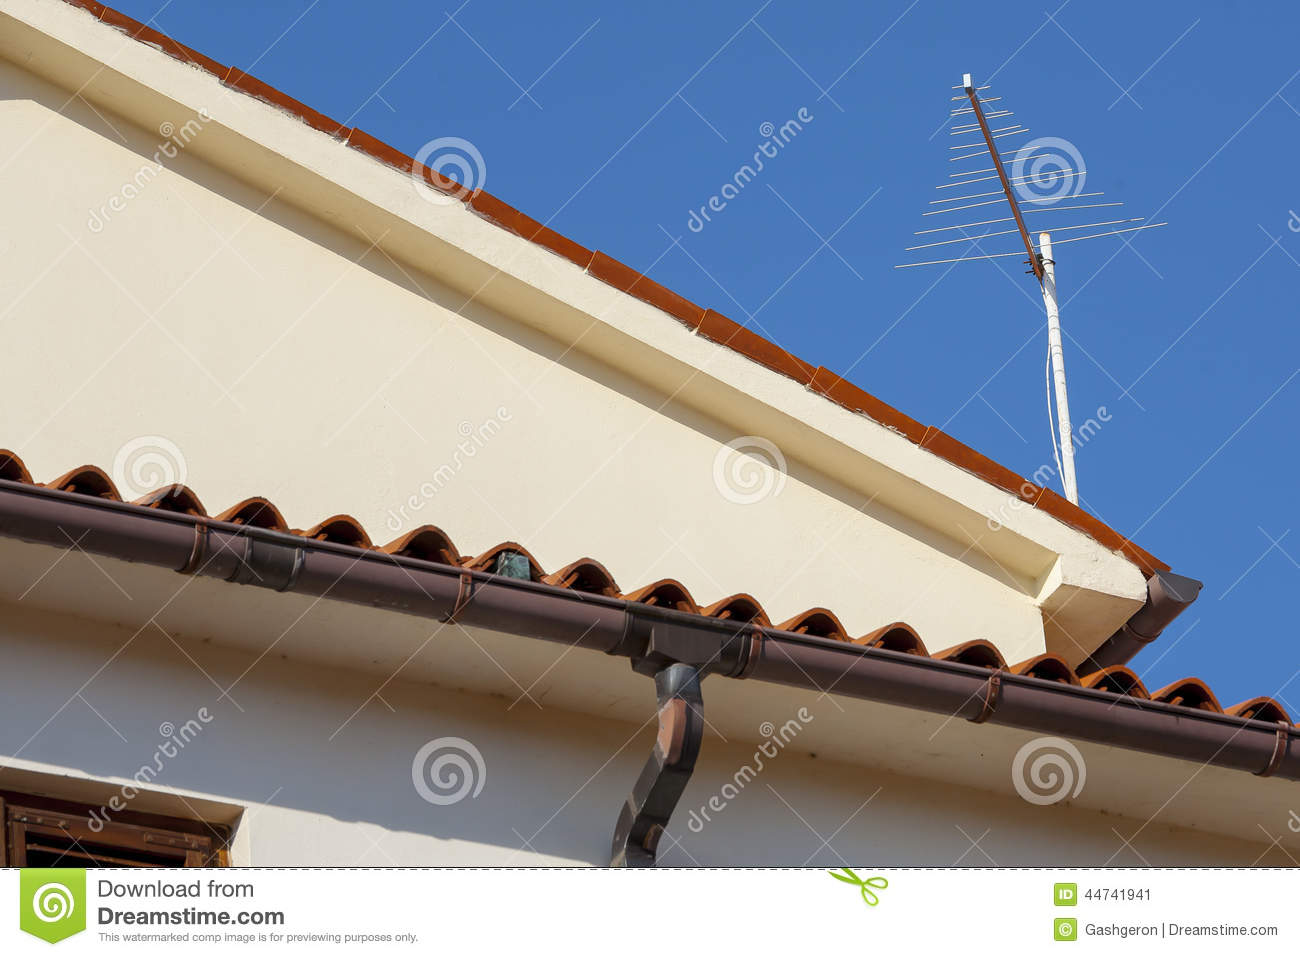 Antenna On The Roof Of The House With Tiles Mr No Pr No 1 39 0